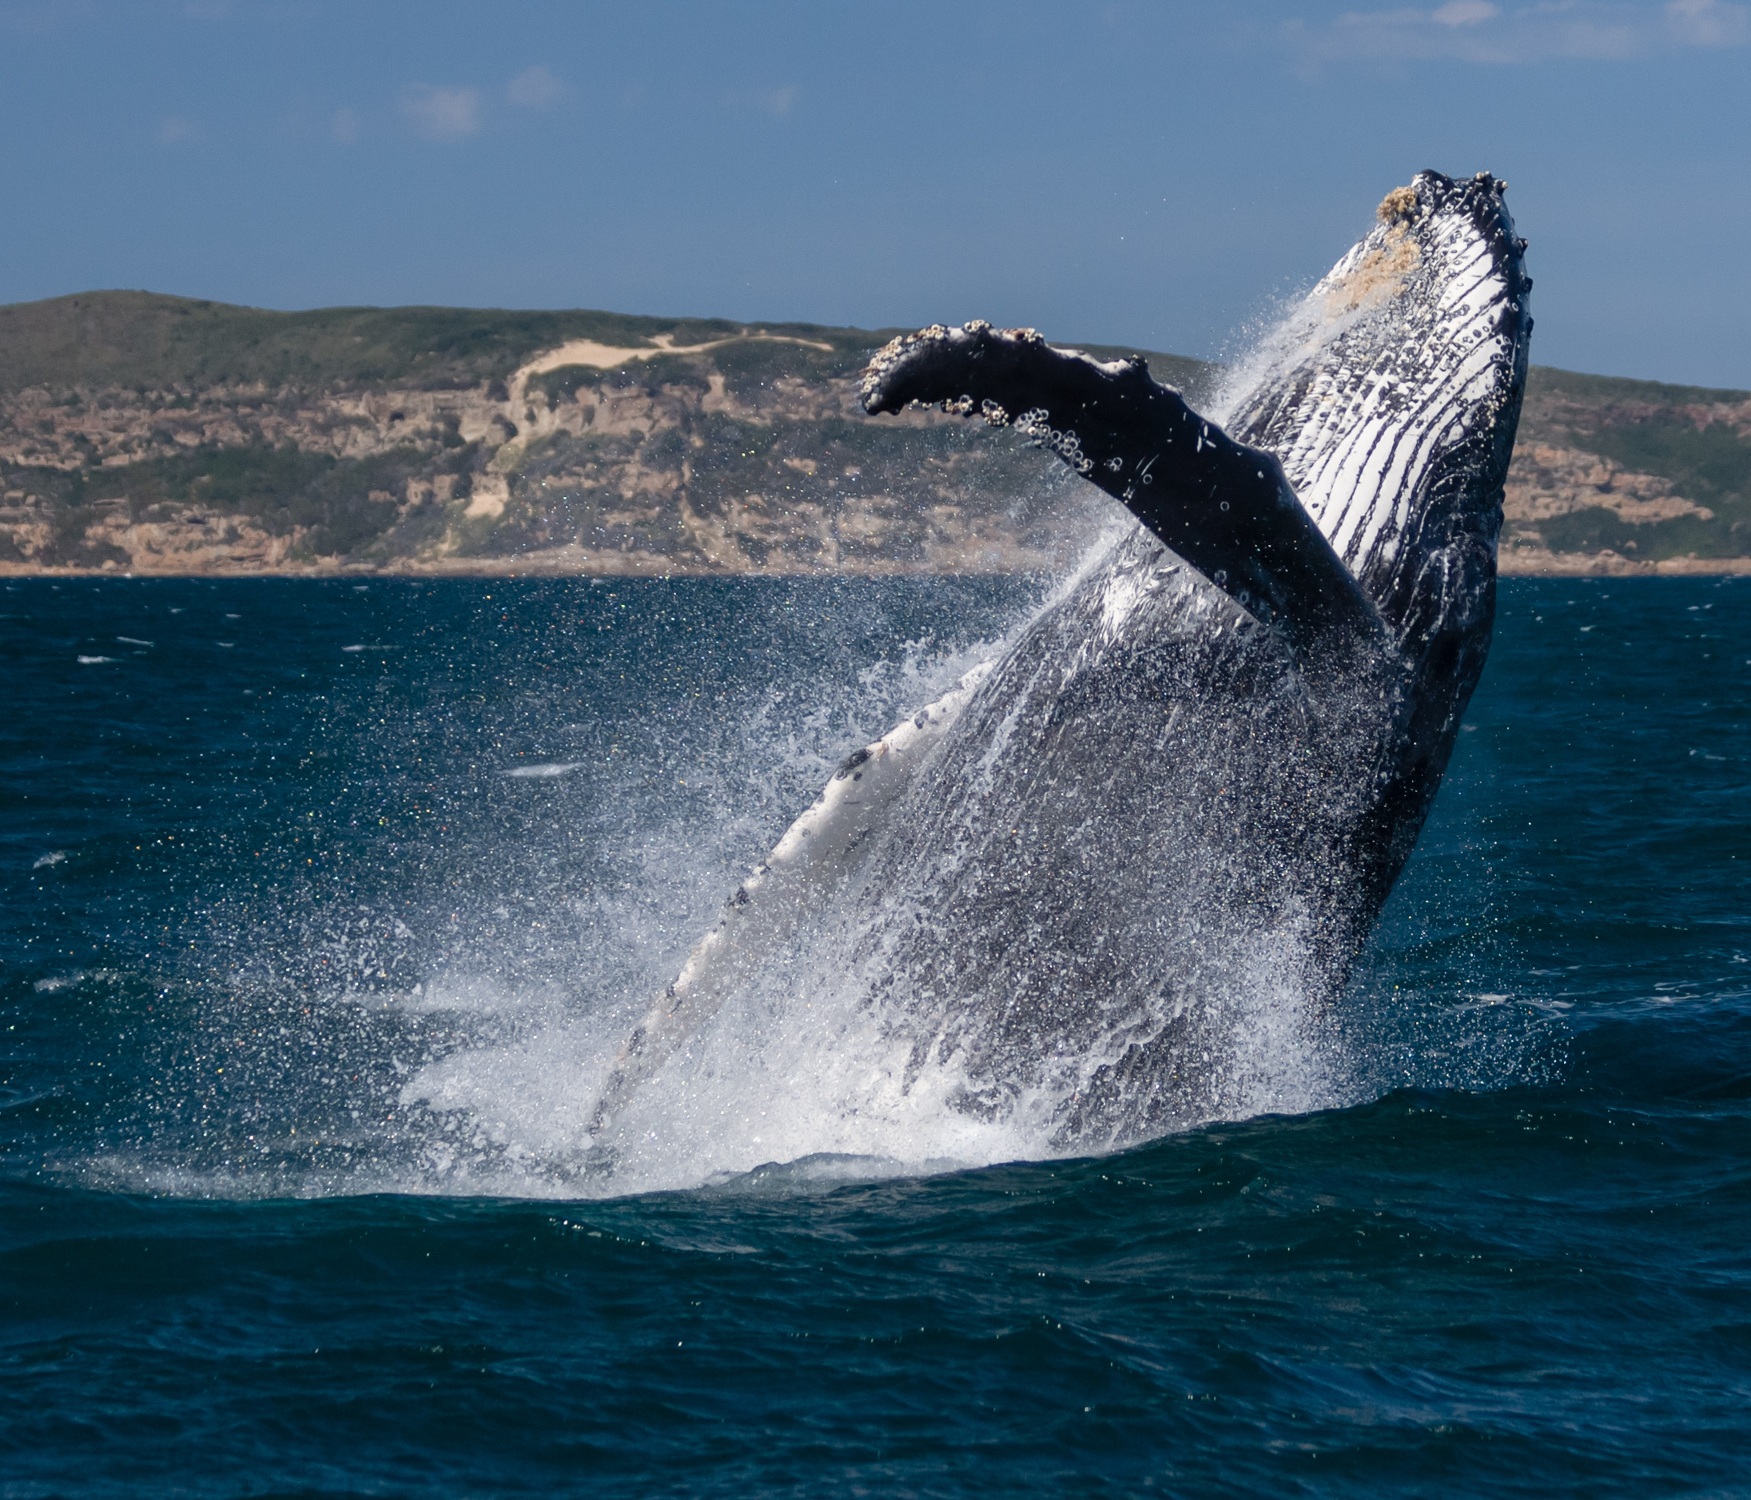 Whale watching at plettenberg bay